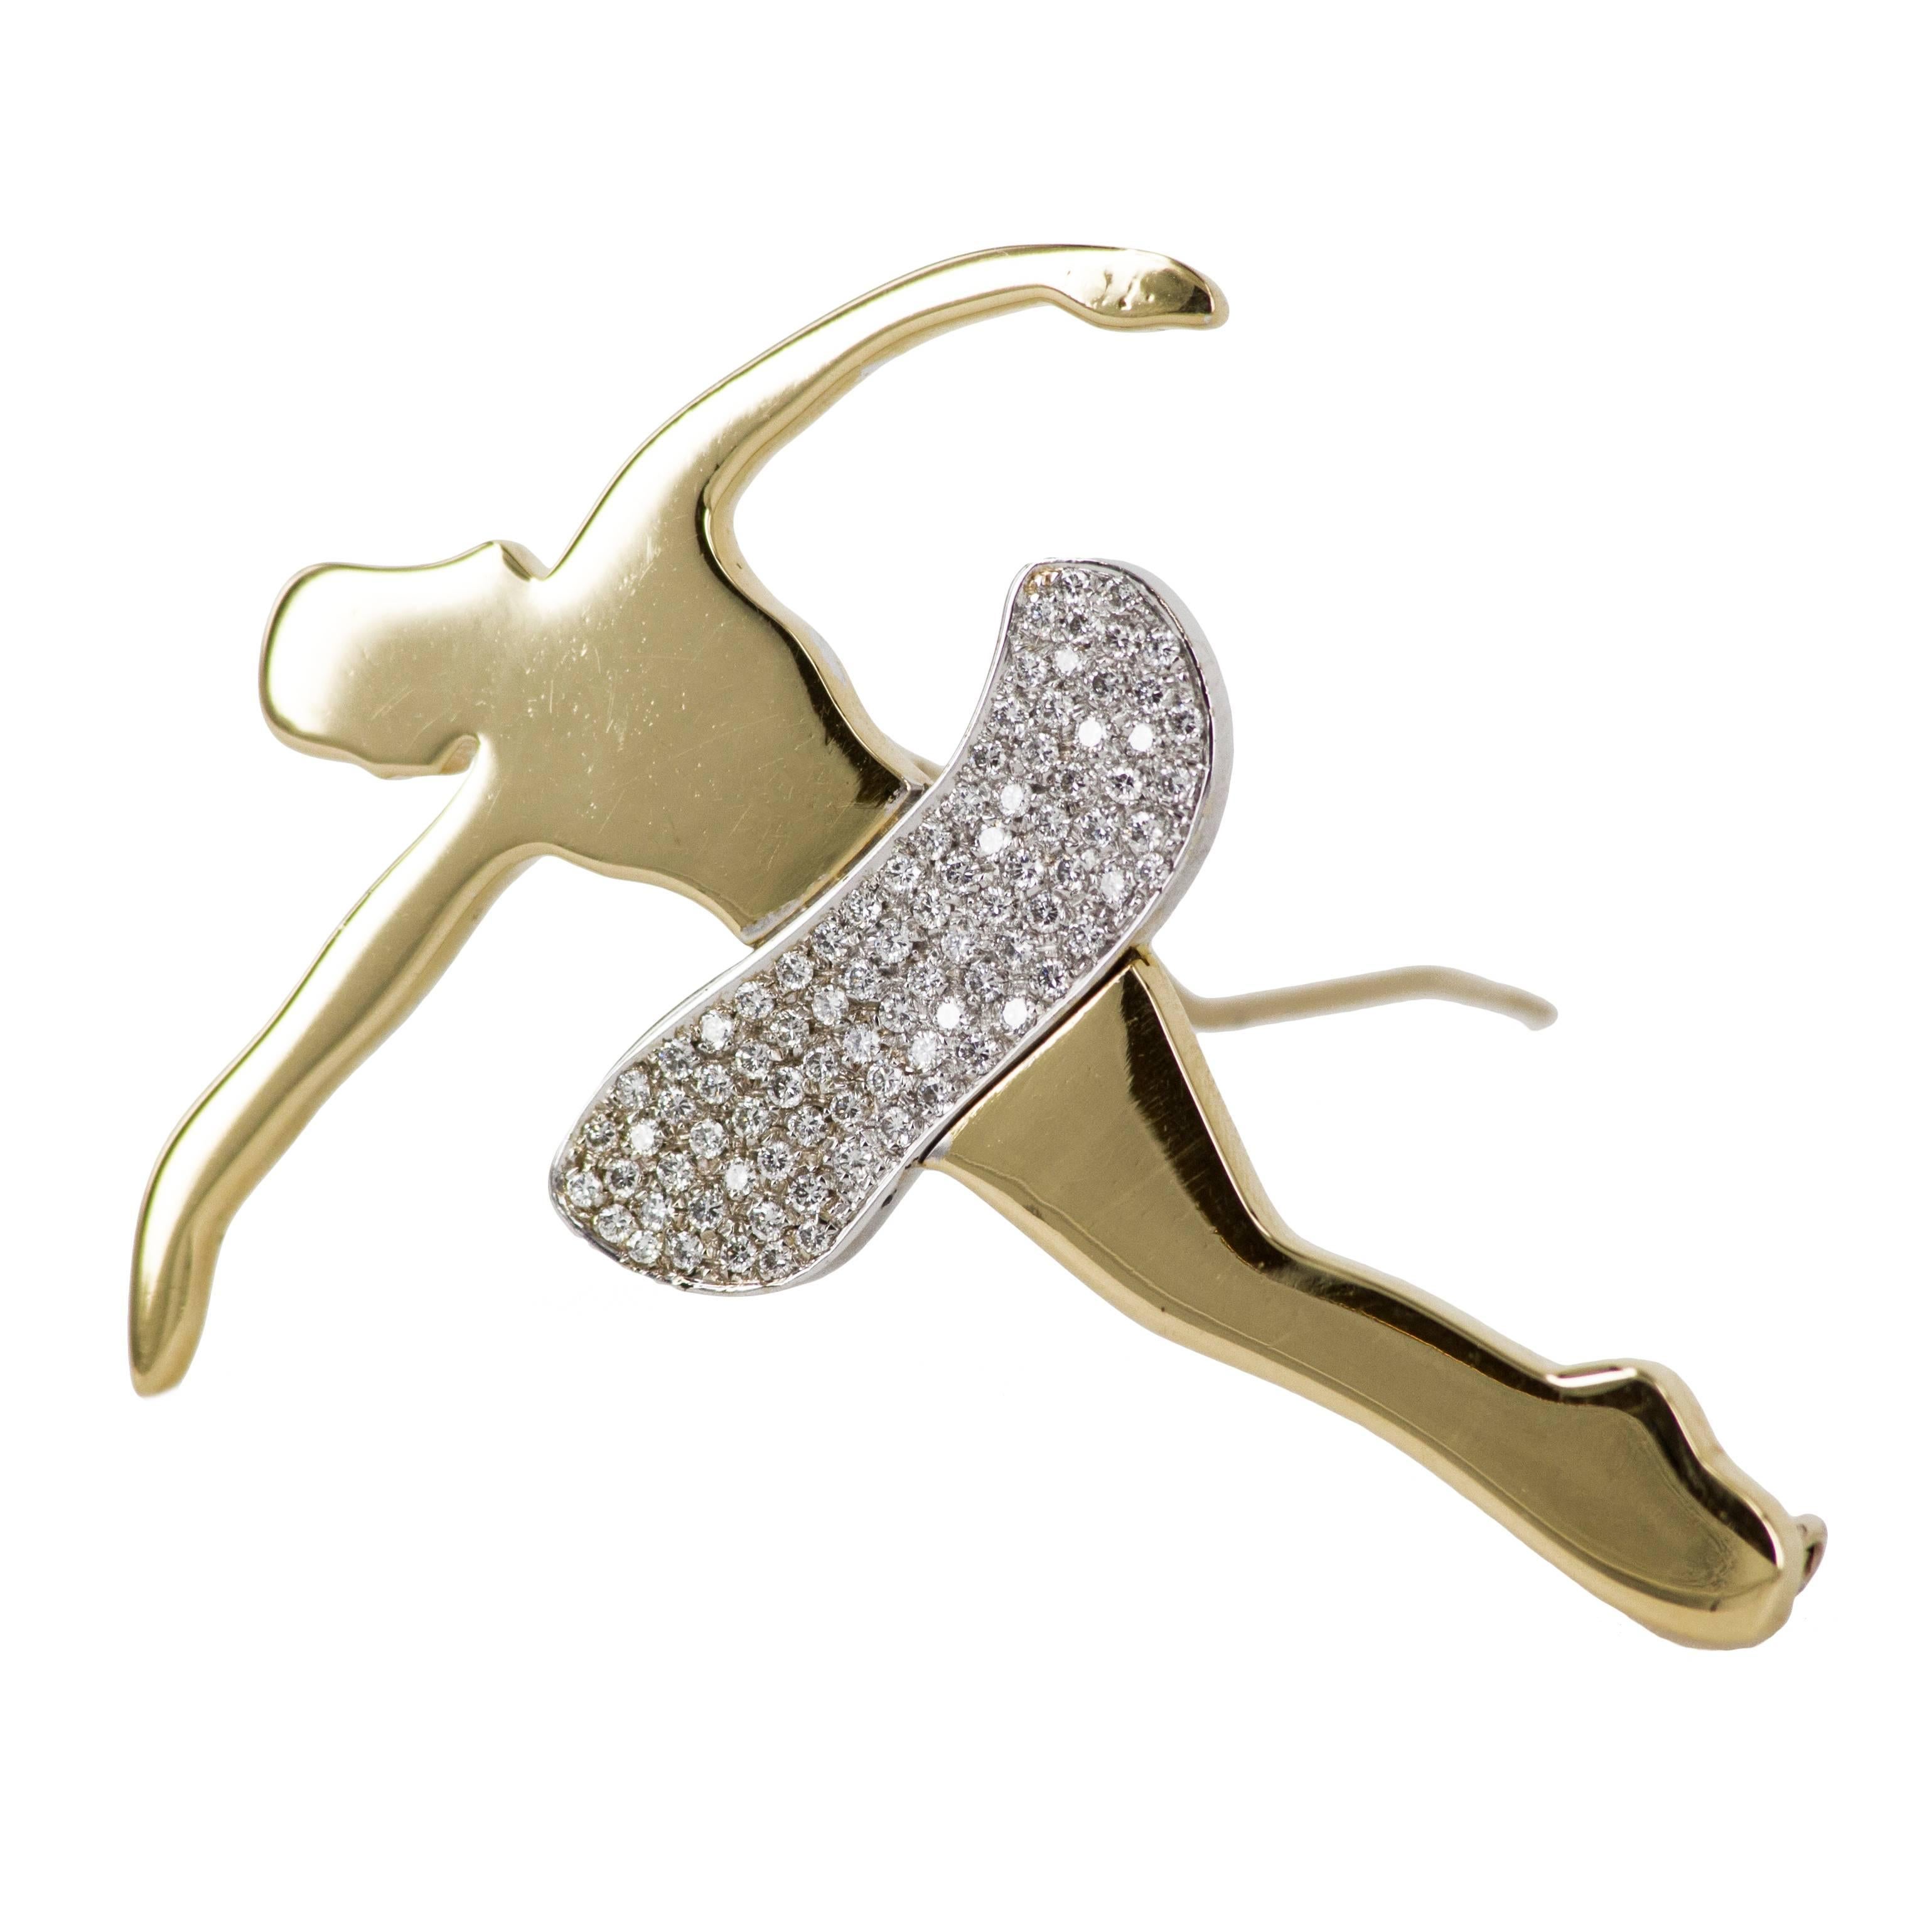 2000 Marco Lodola "Ballerina with Diamonds" Gold Brooch For Sale